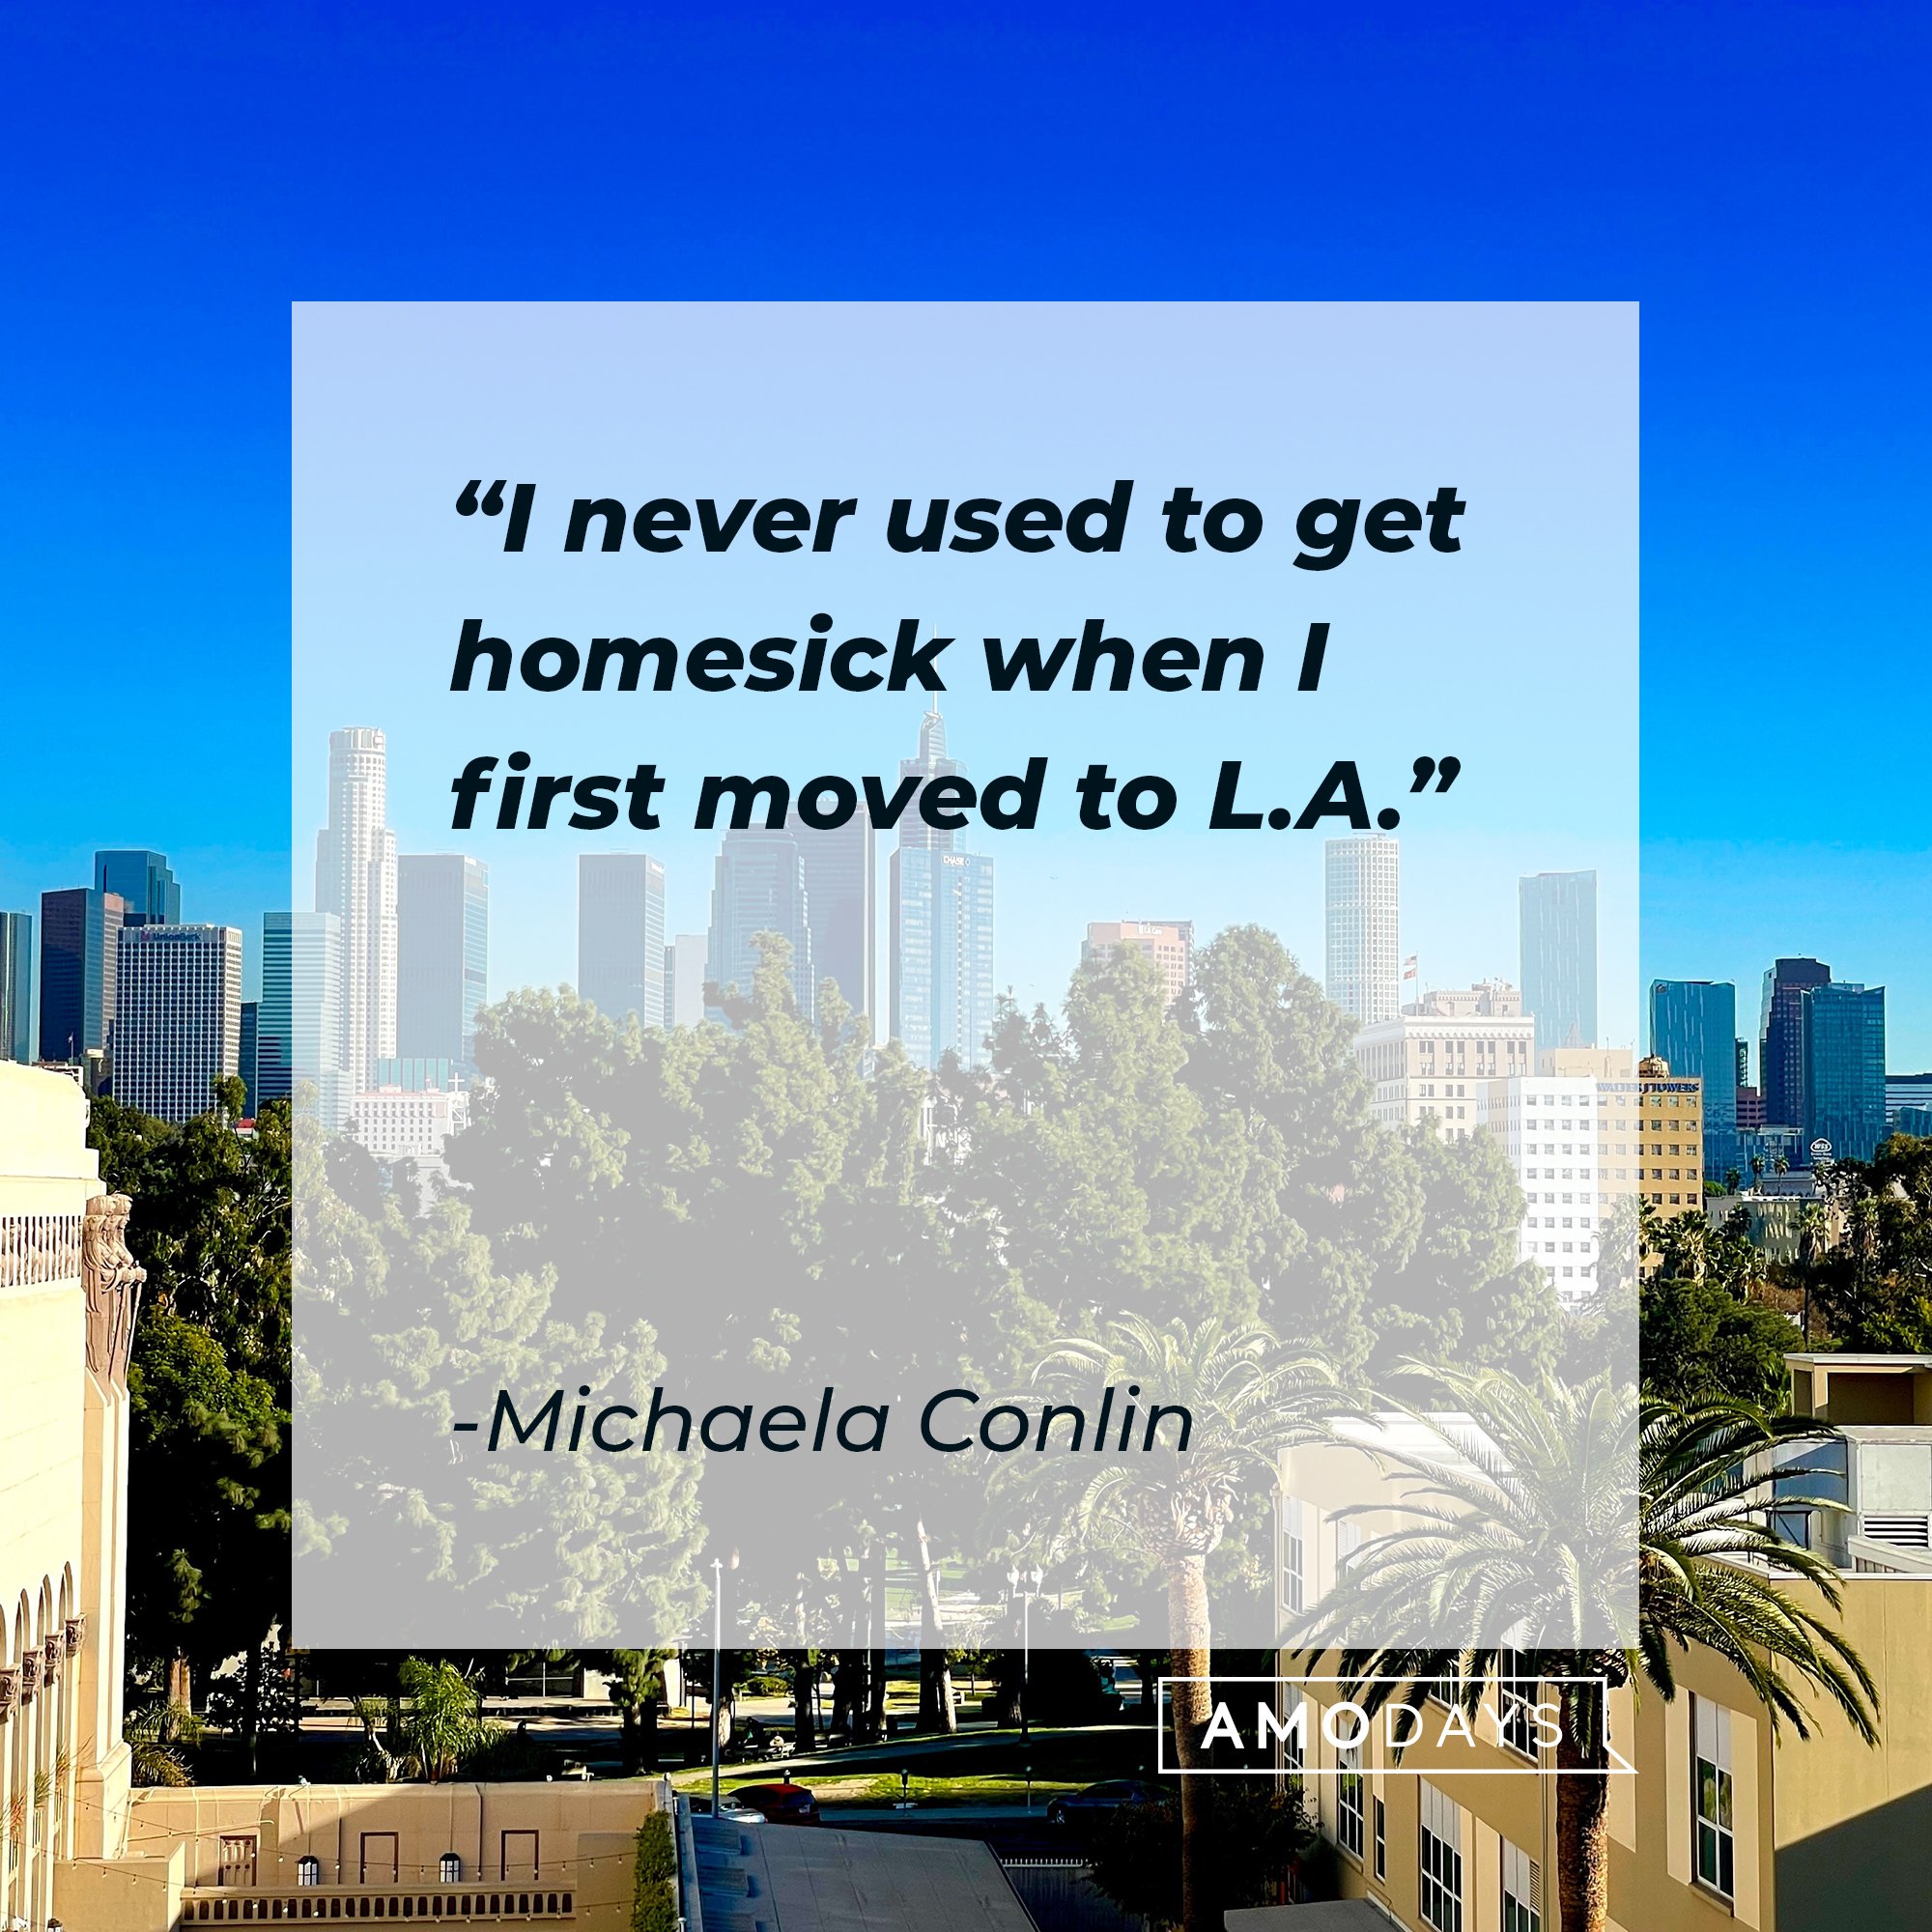 Michaela Conlin's quote: "I never used to get homesick when I first moved to L.A." | Image: AmoDays